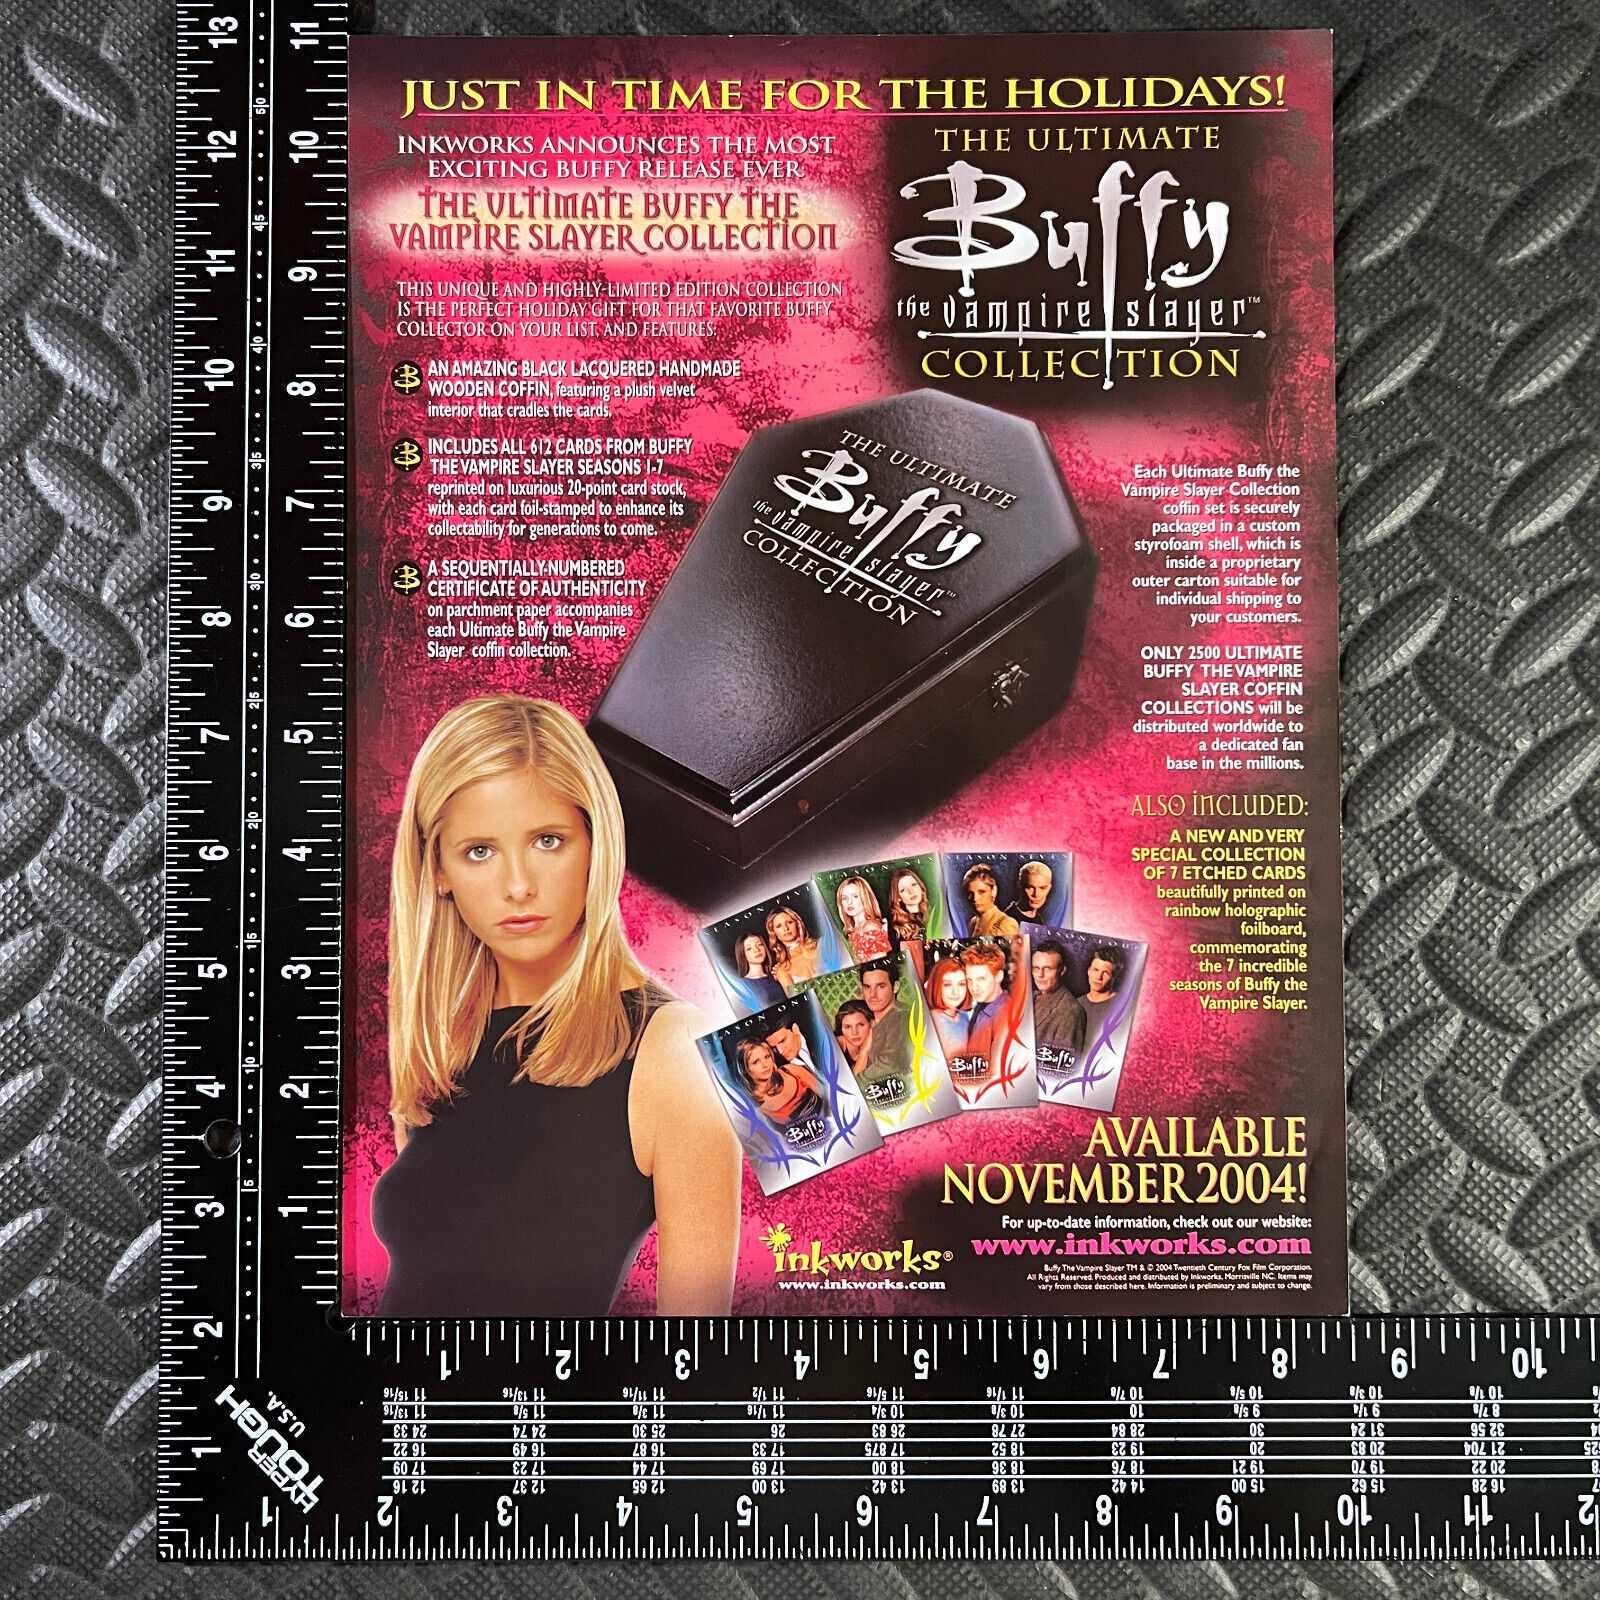 INKWORKS \'04 BUFFY THE VAMPIRE SLAYER ULTIMATE COLLECTION FLYER PROMO SELL SHEET